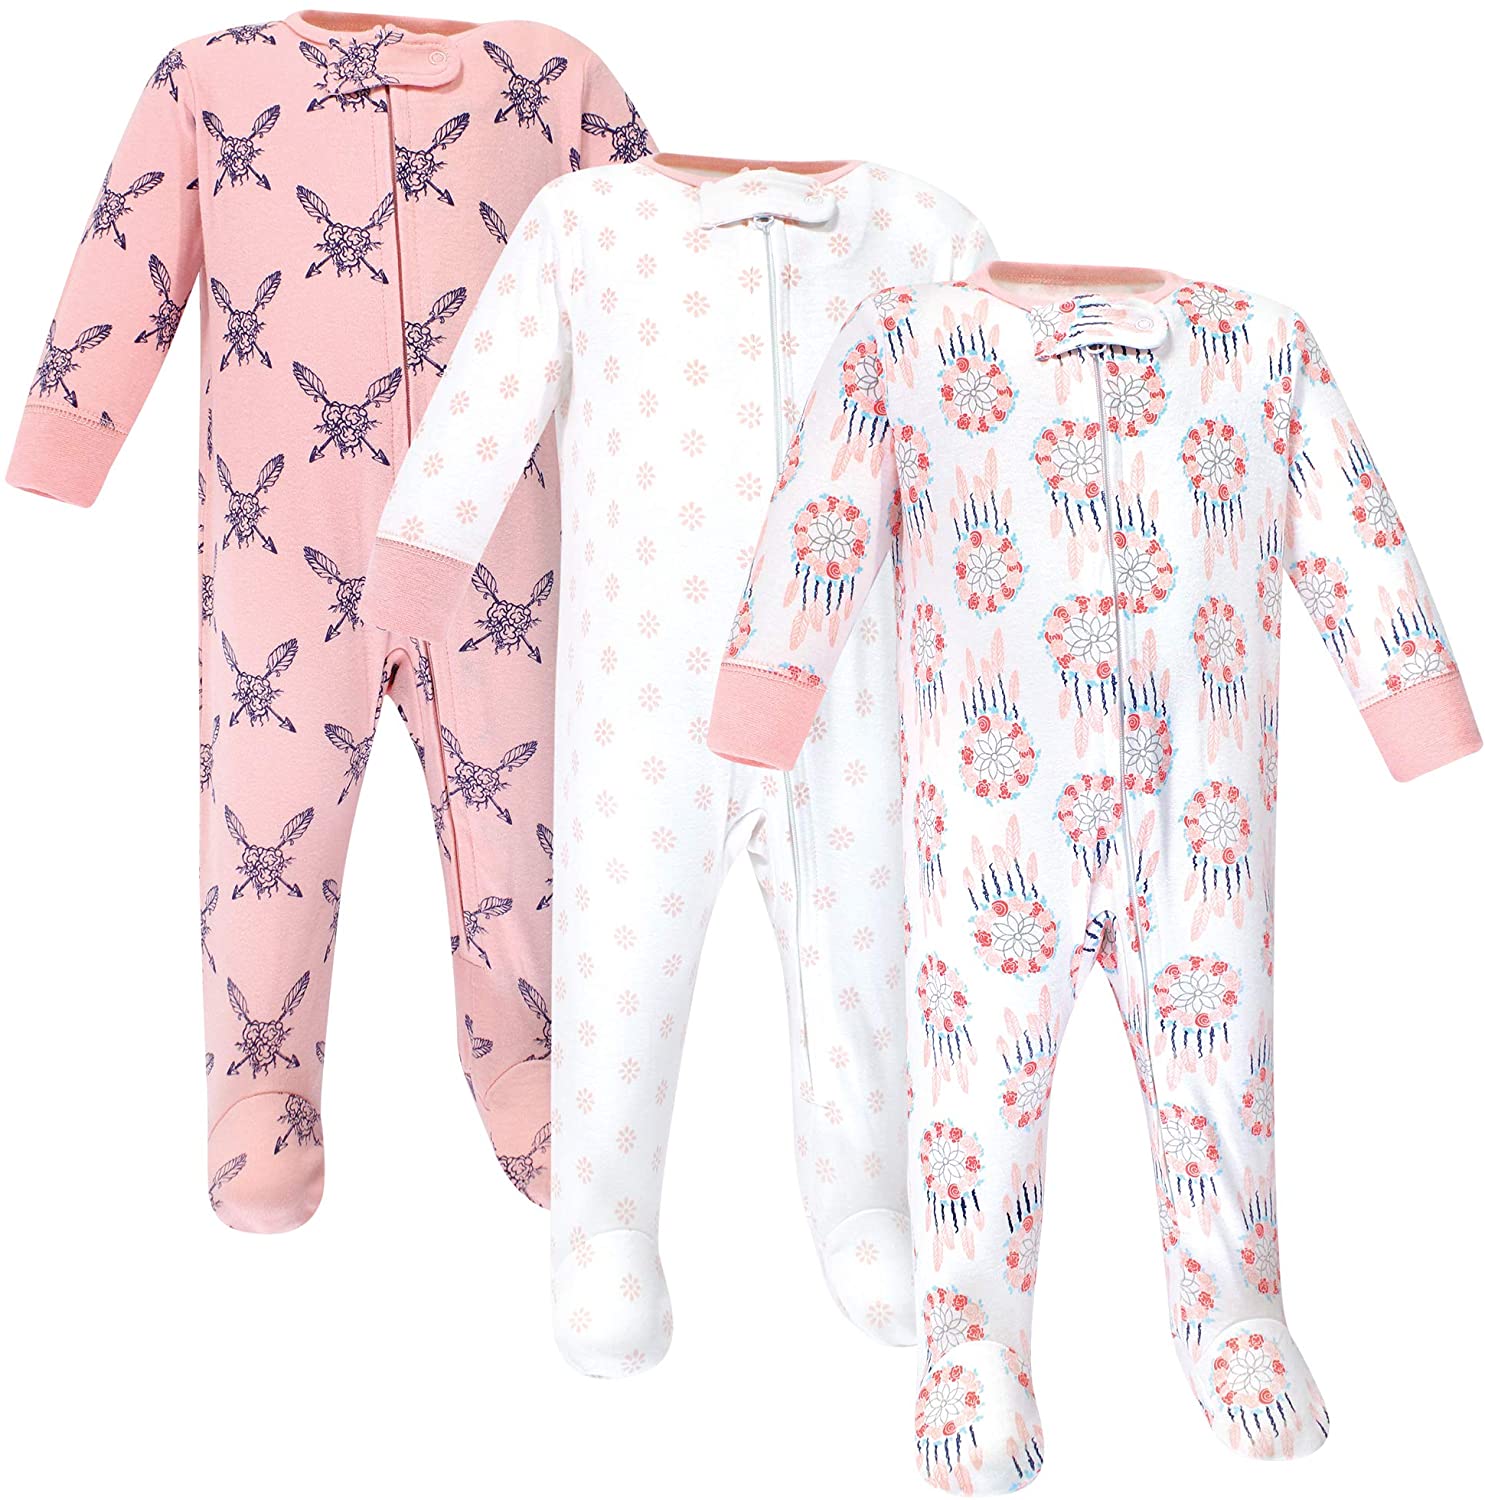 Yoga Sprout Cotton Zipper Baby Girl Sleeper, 3-Pack